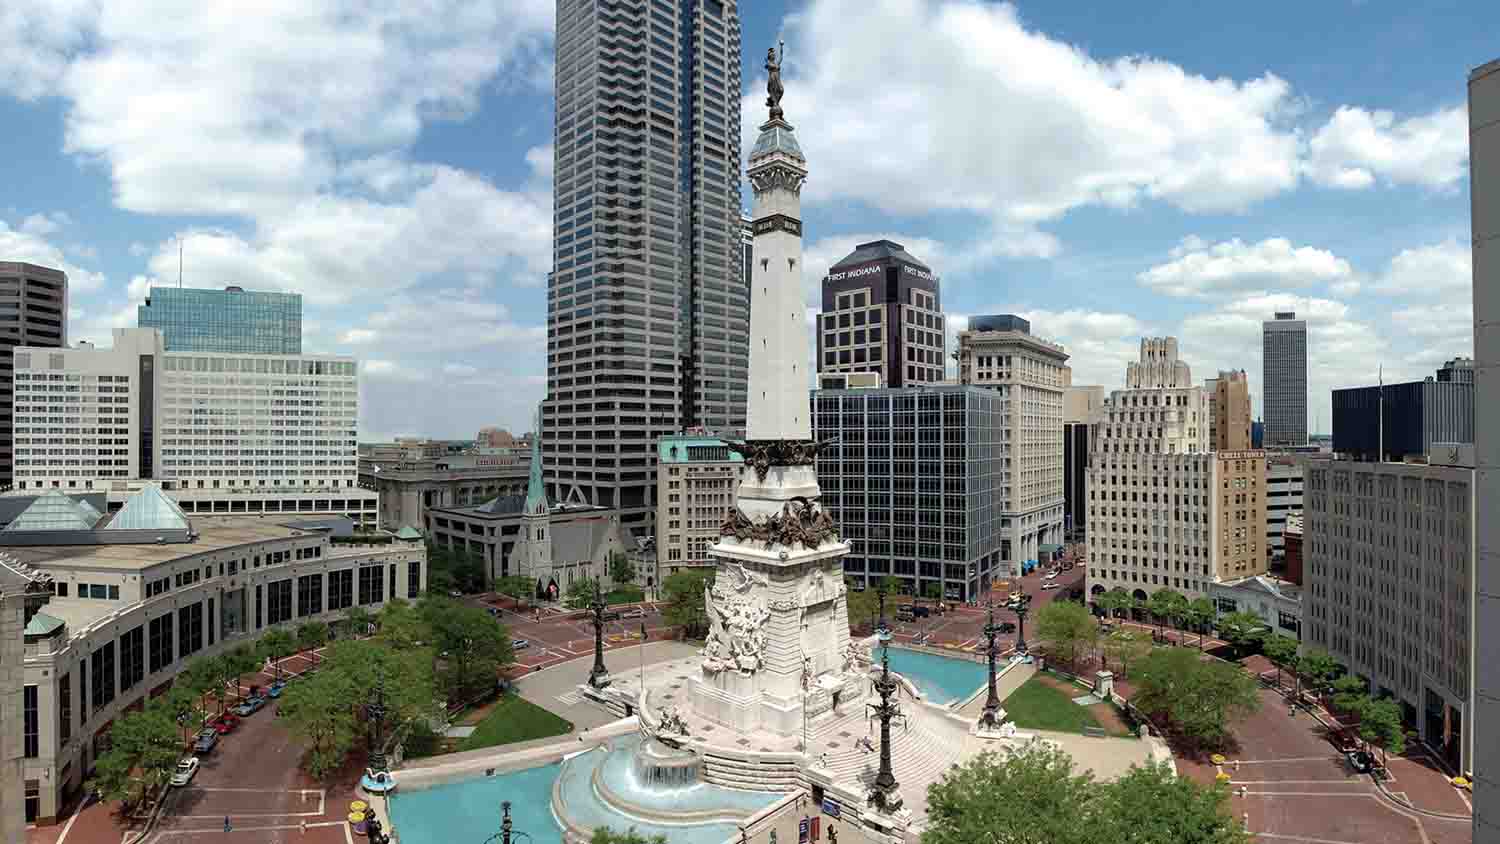 MobileNOW! Goes Live June 1st in Downtown Indianapolis with Denison Parking